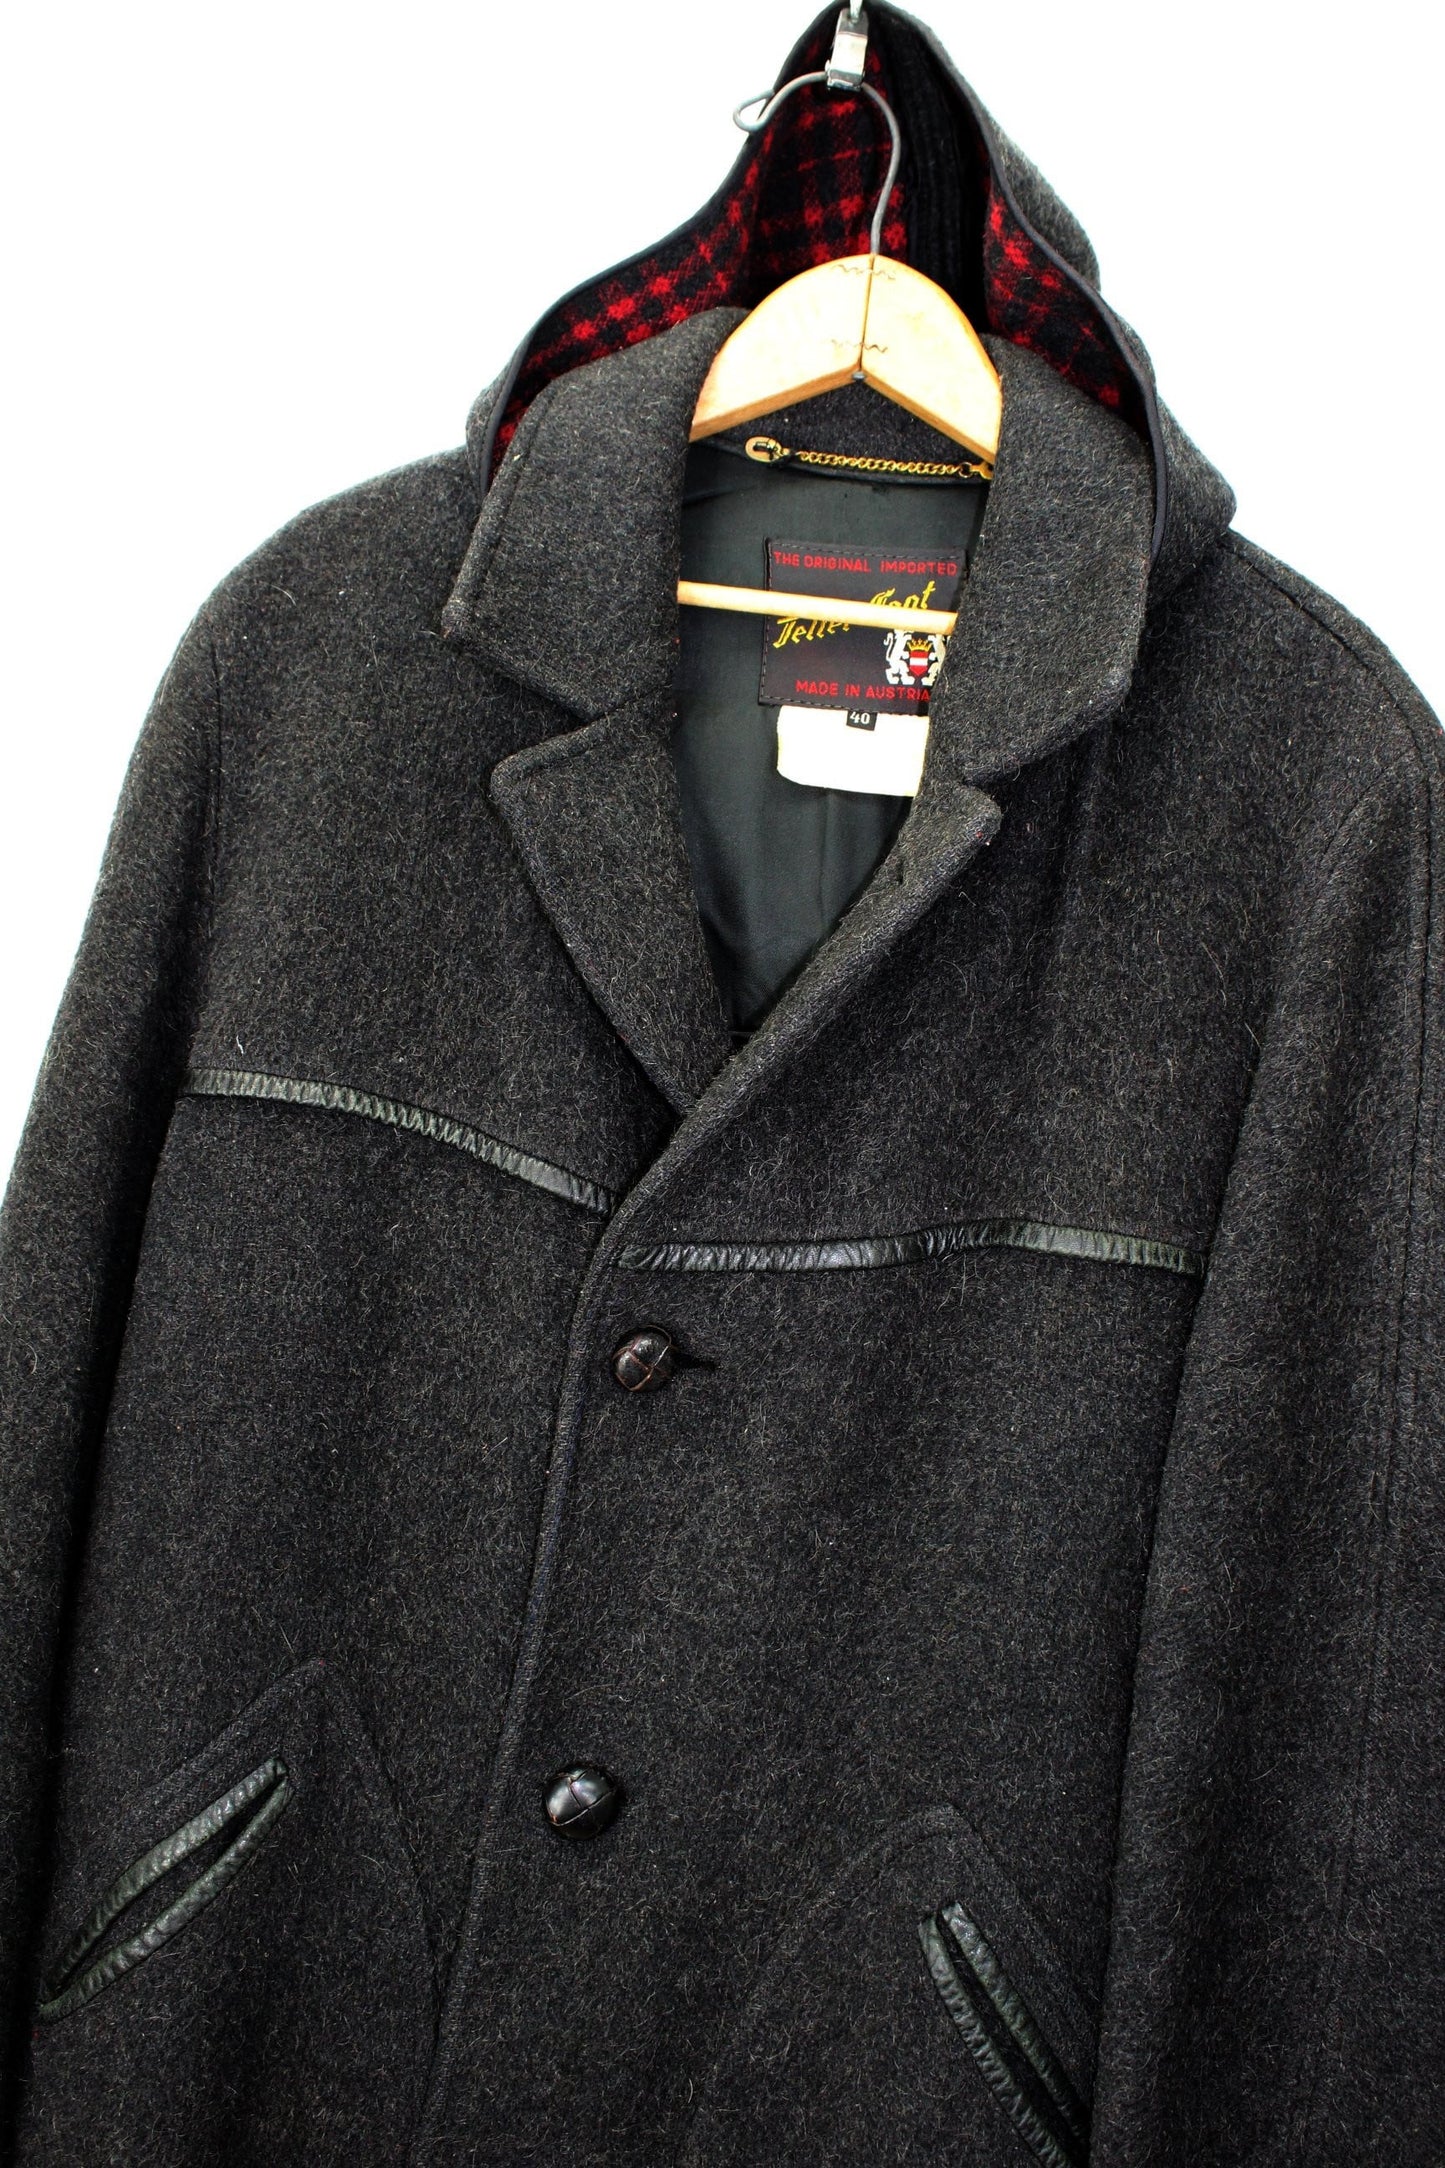 Teller Coat Austria Vintage 1960s Wool Car Coat - Fully Lined - Hood Buttons  removable hood